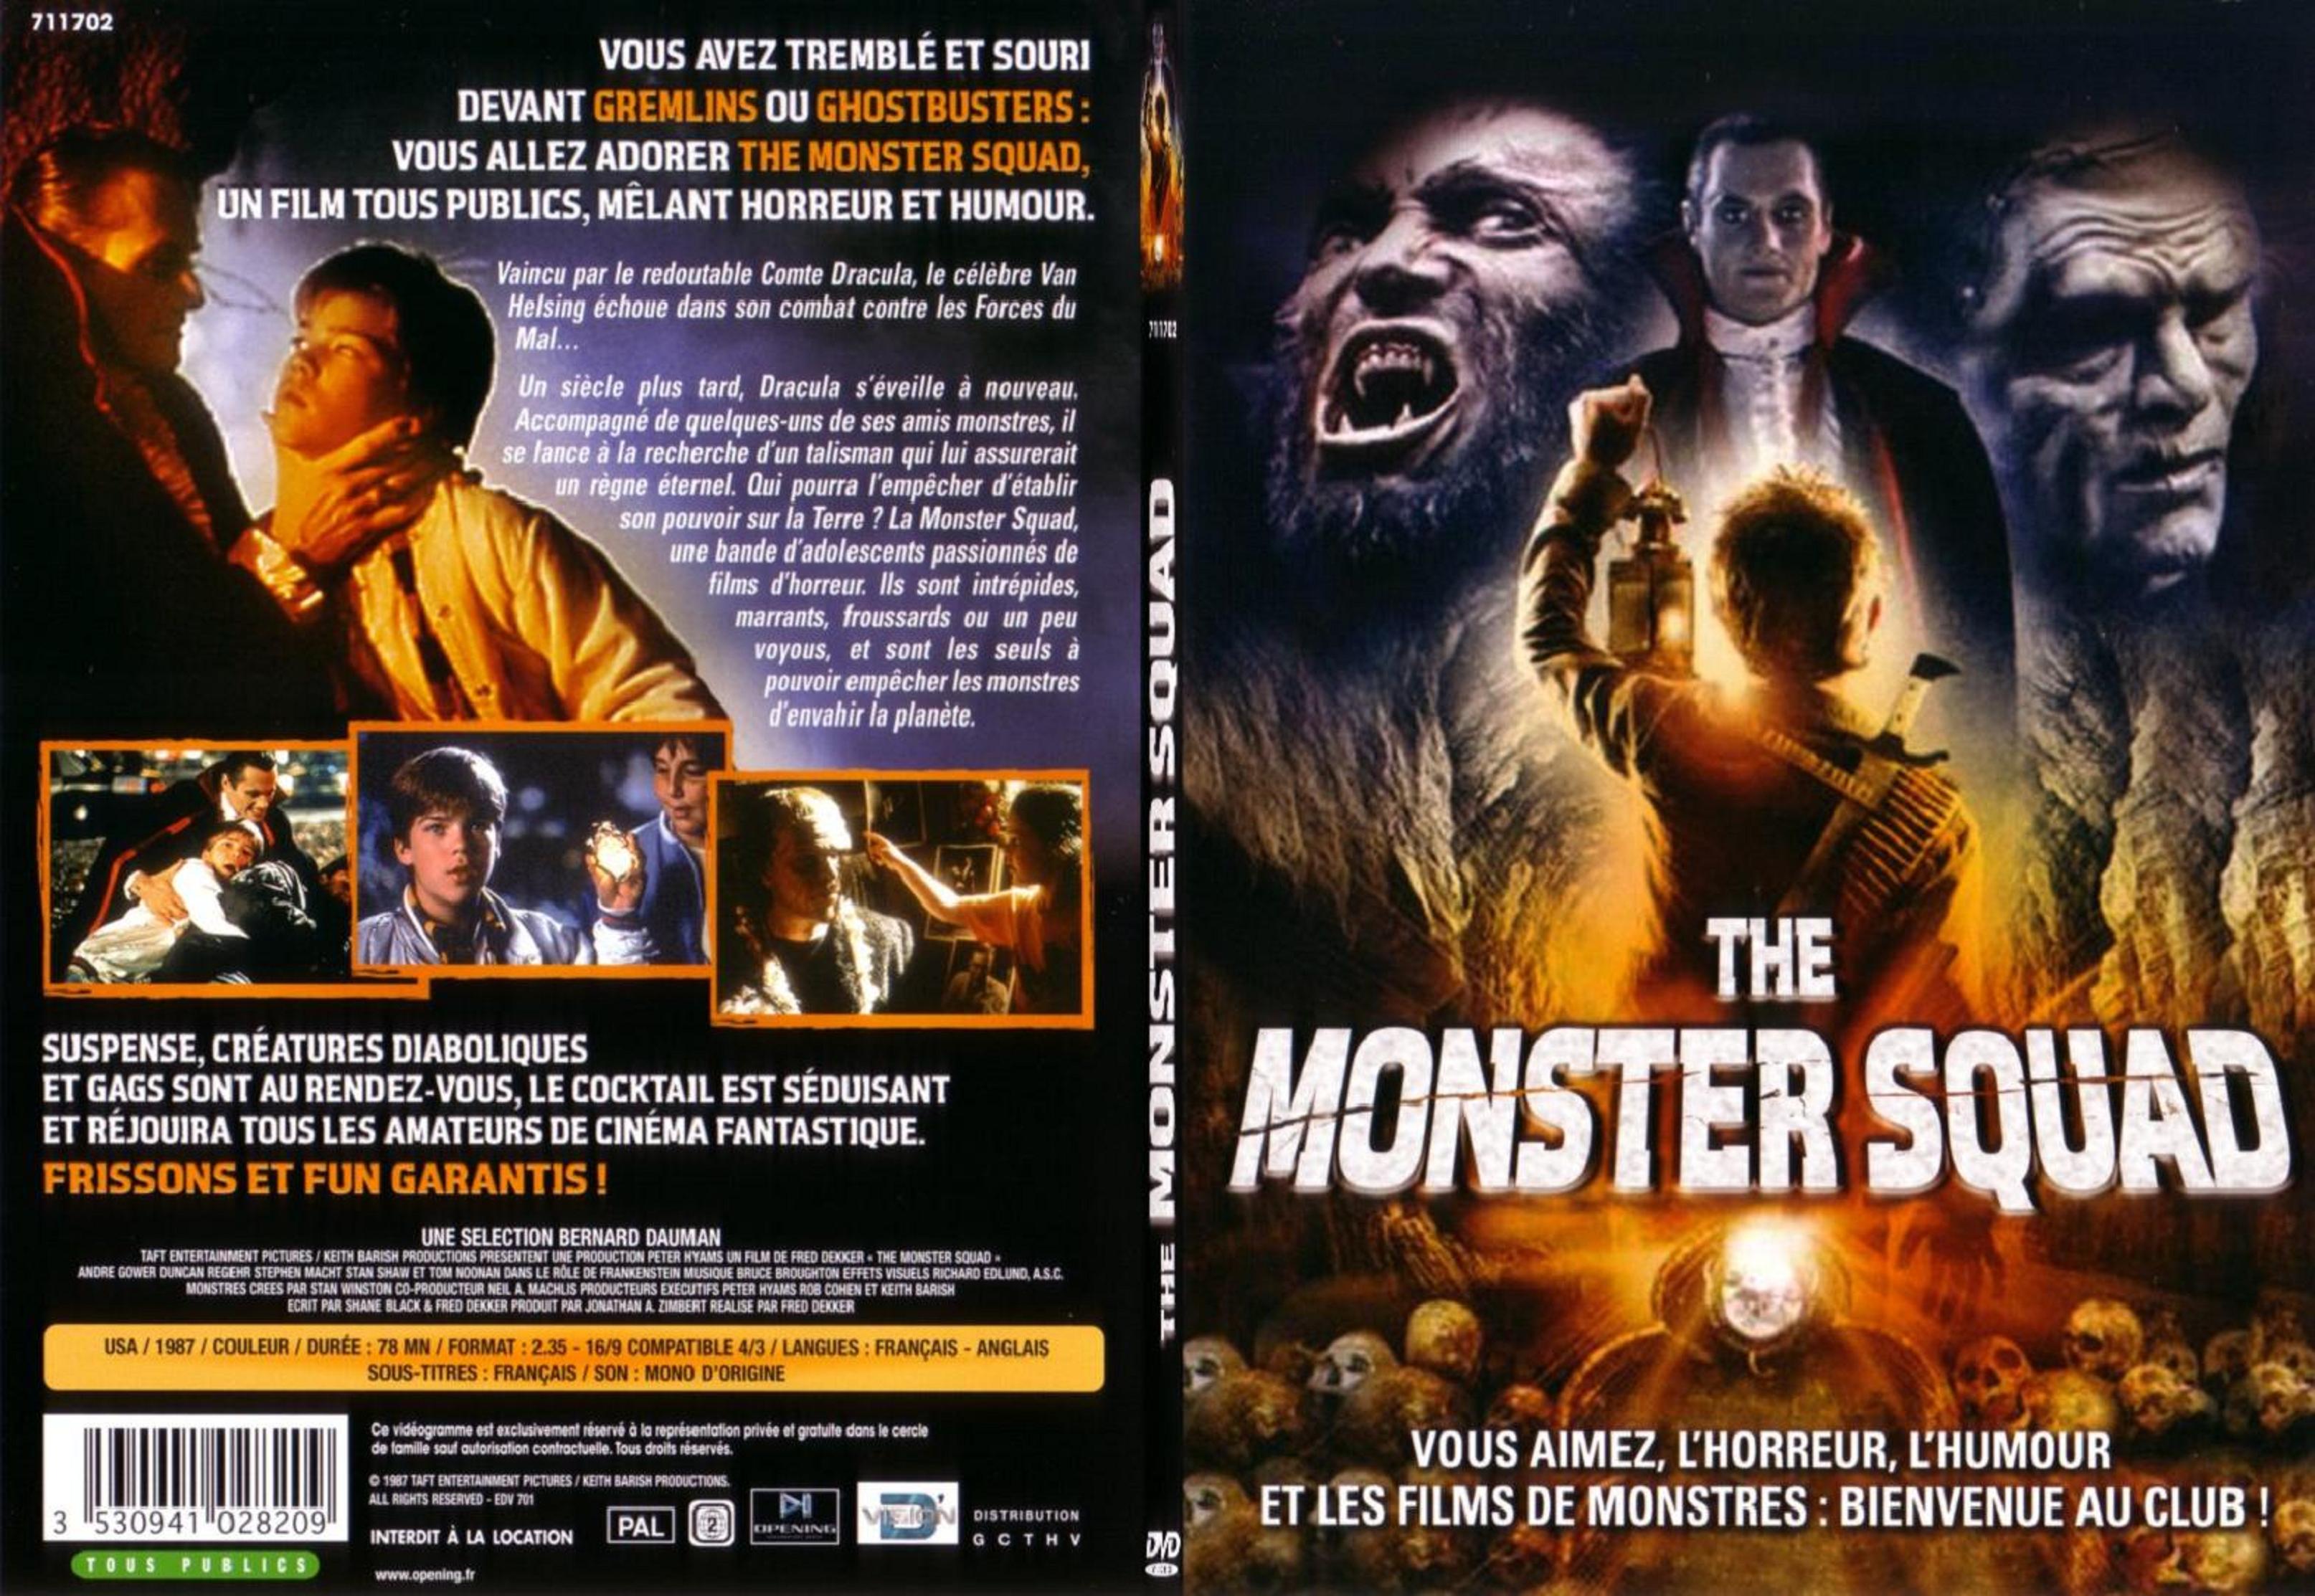 Jaquette DVD The monster squad - SLIM